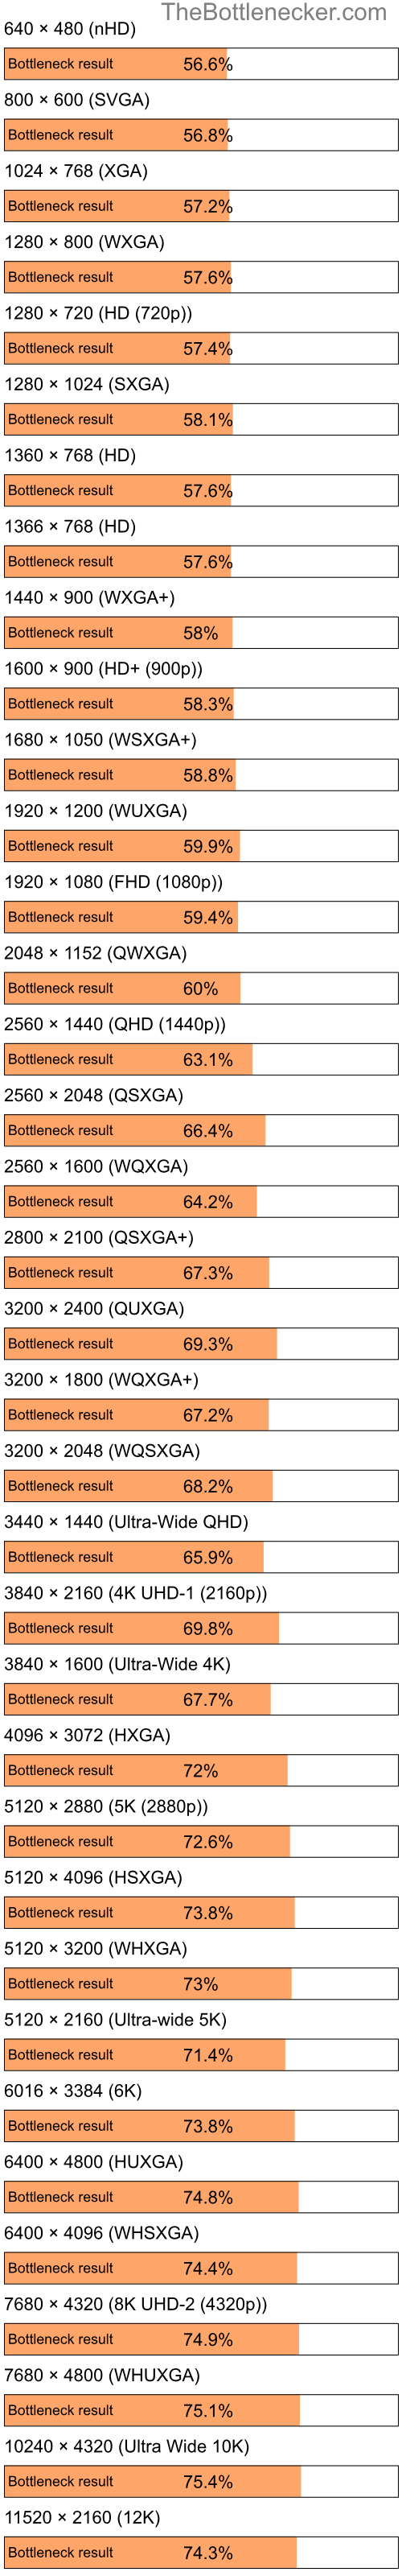 Bottleneck results by resolution for Intel Pentium 4 and NVIDIA GeForce 7500 LE in Processor Intense Tasks